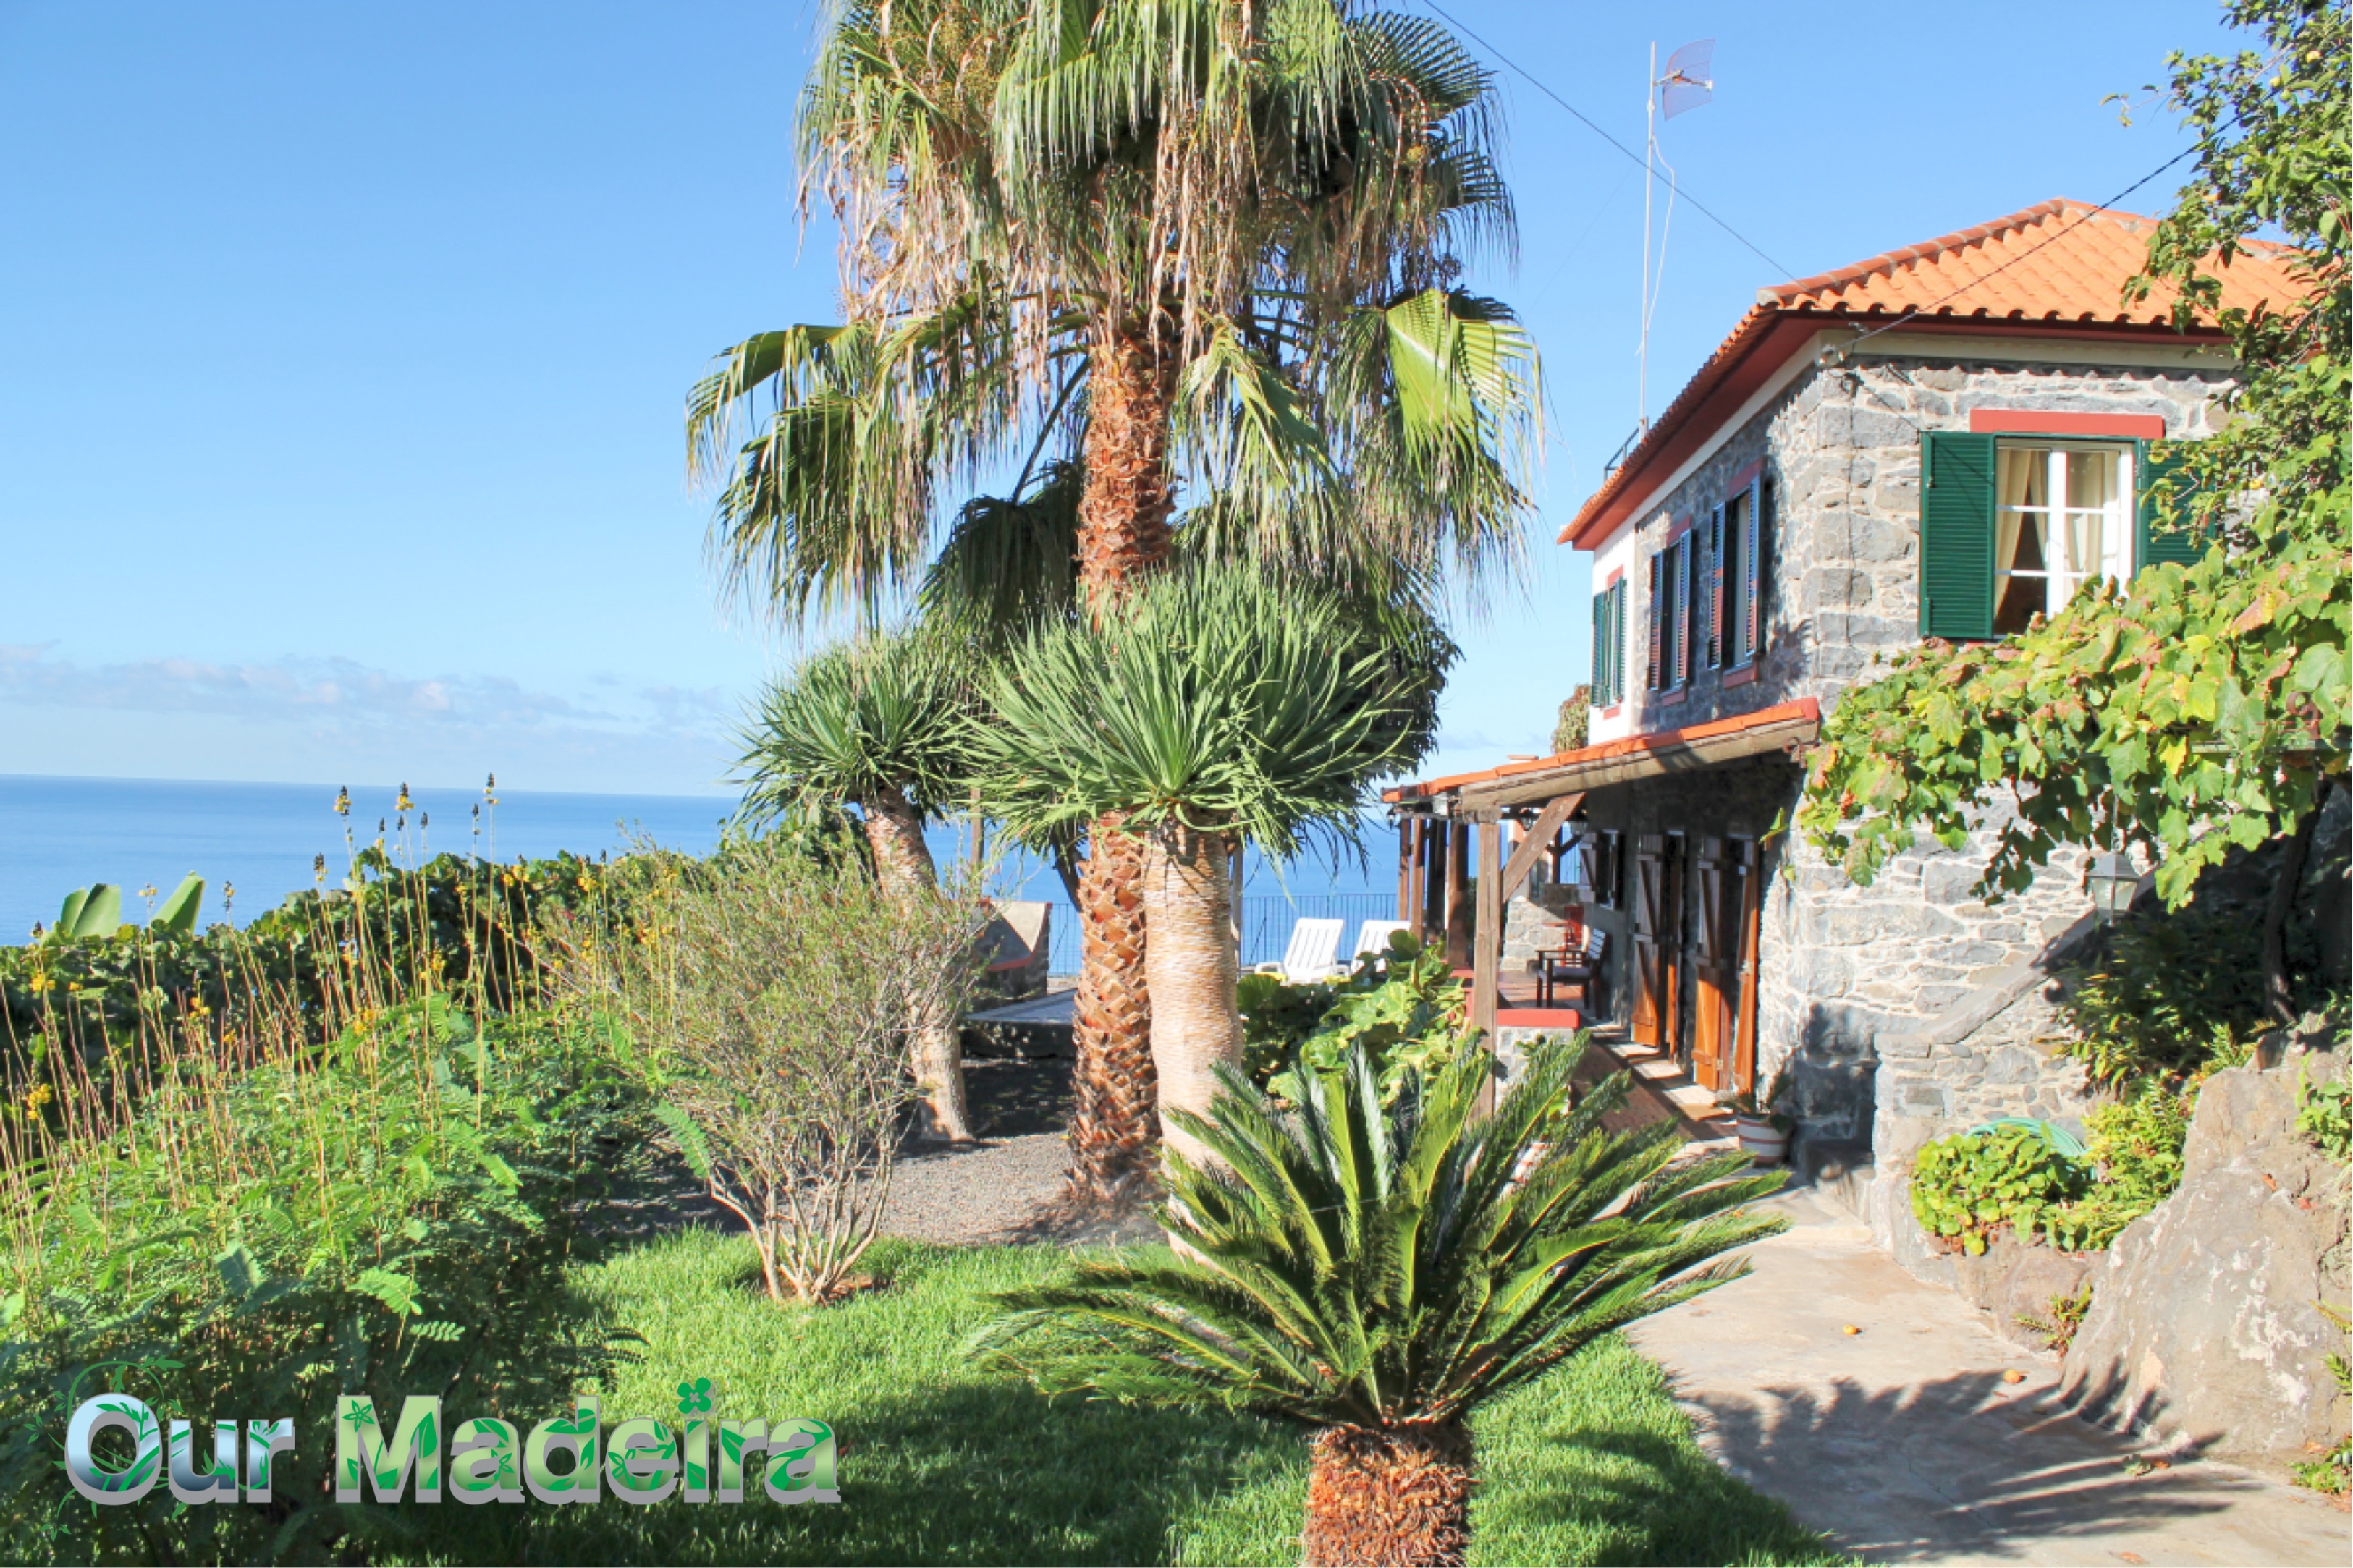 CASA ARCO OLD - 5 minutes from the Serra and the Sea (center of